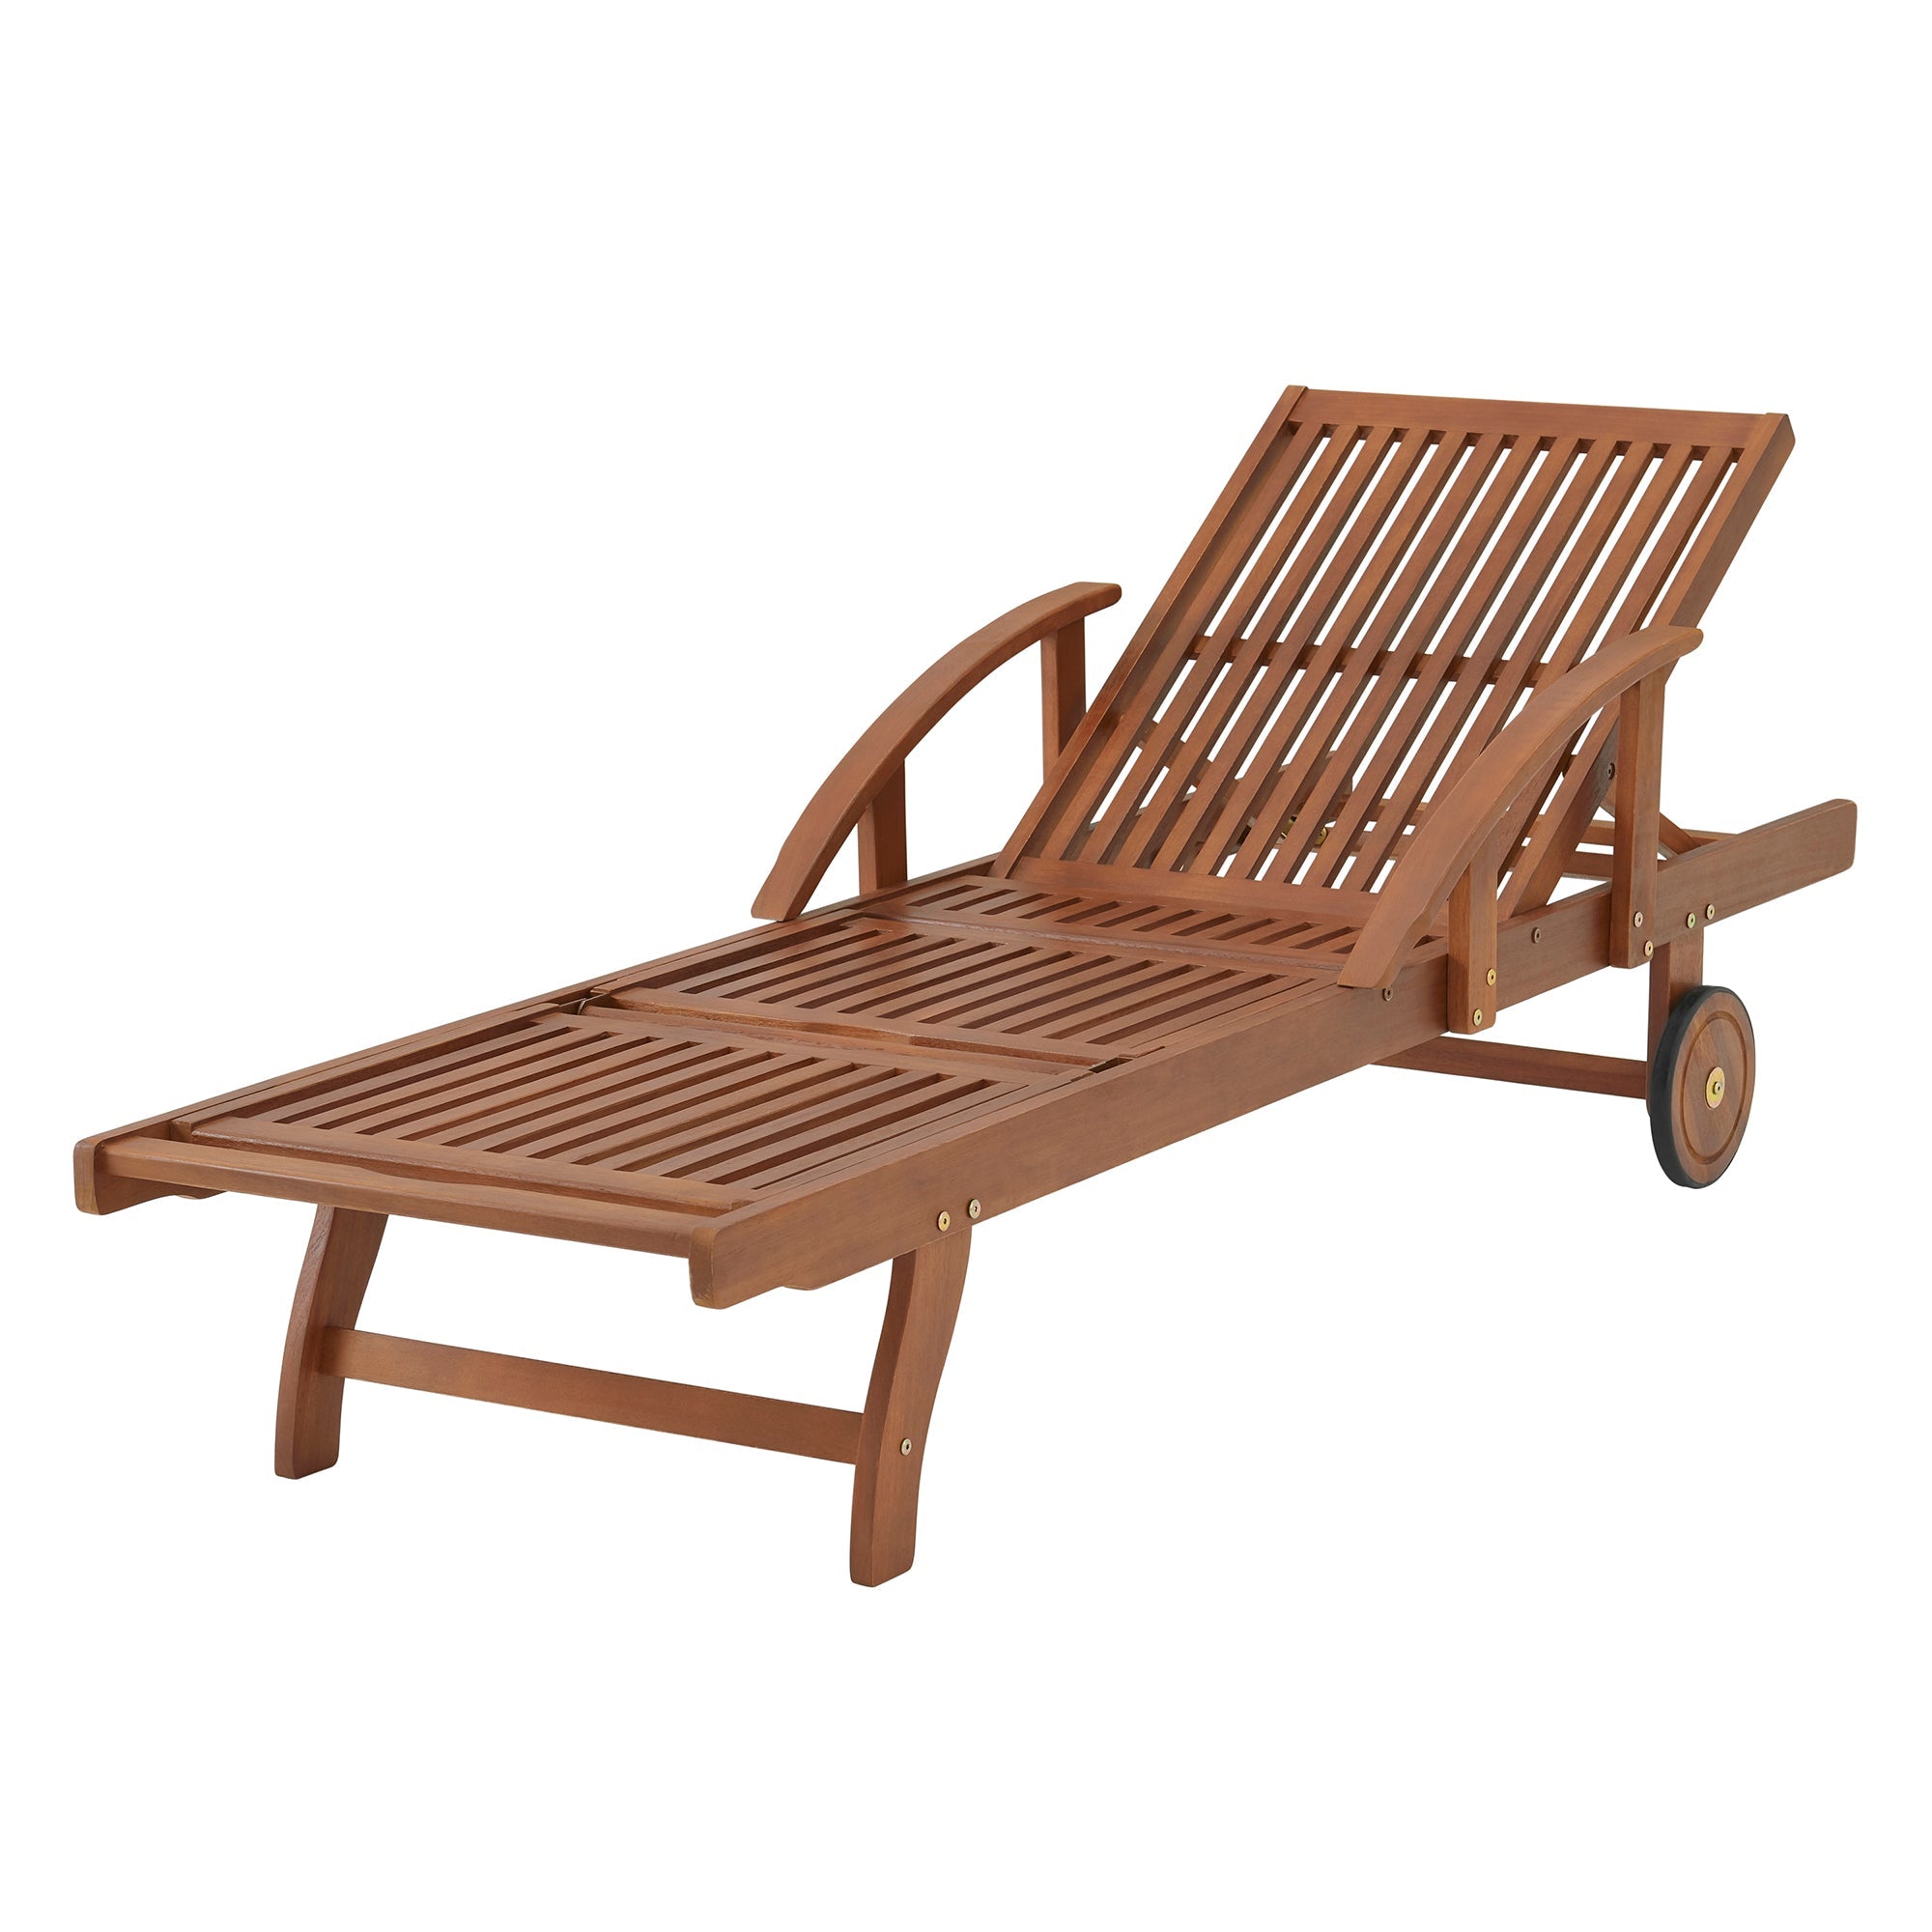 Light Brown Oil Caspian Eucalyptus Wood Outdoor Lounge Chair with Arms and Adjustable Leg Rest - Outdoor Seating